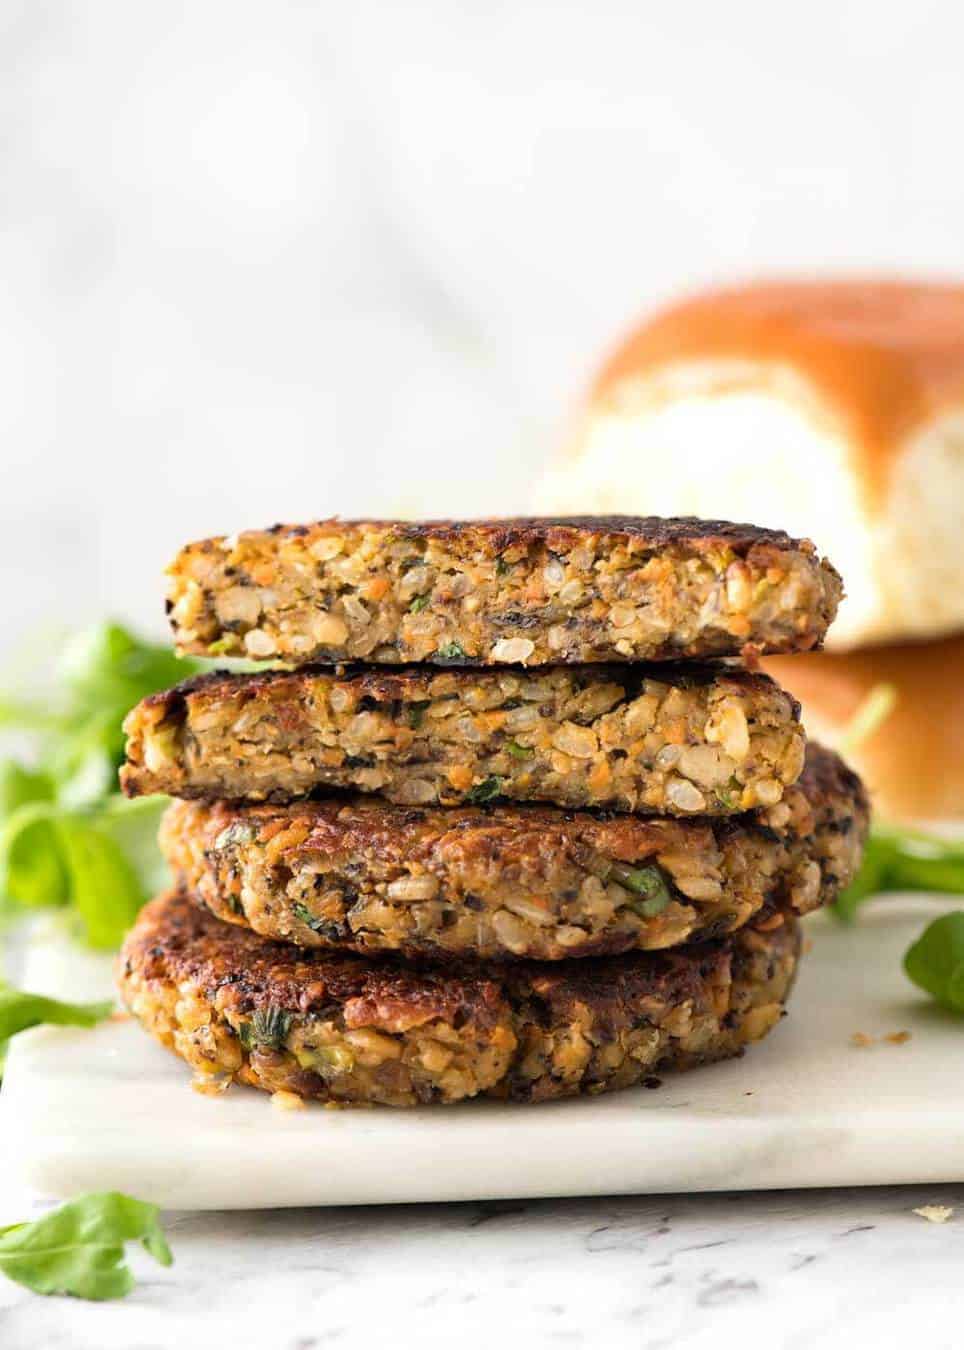 Stack of Veggie Burgers with one patty cut open to show the inside